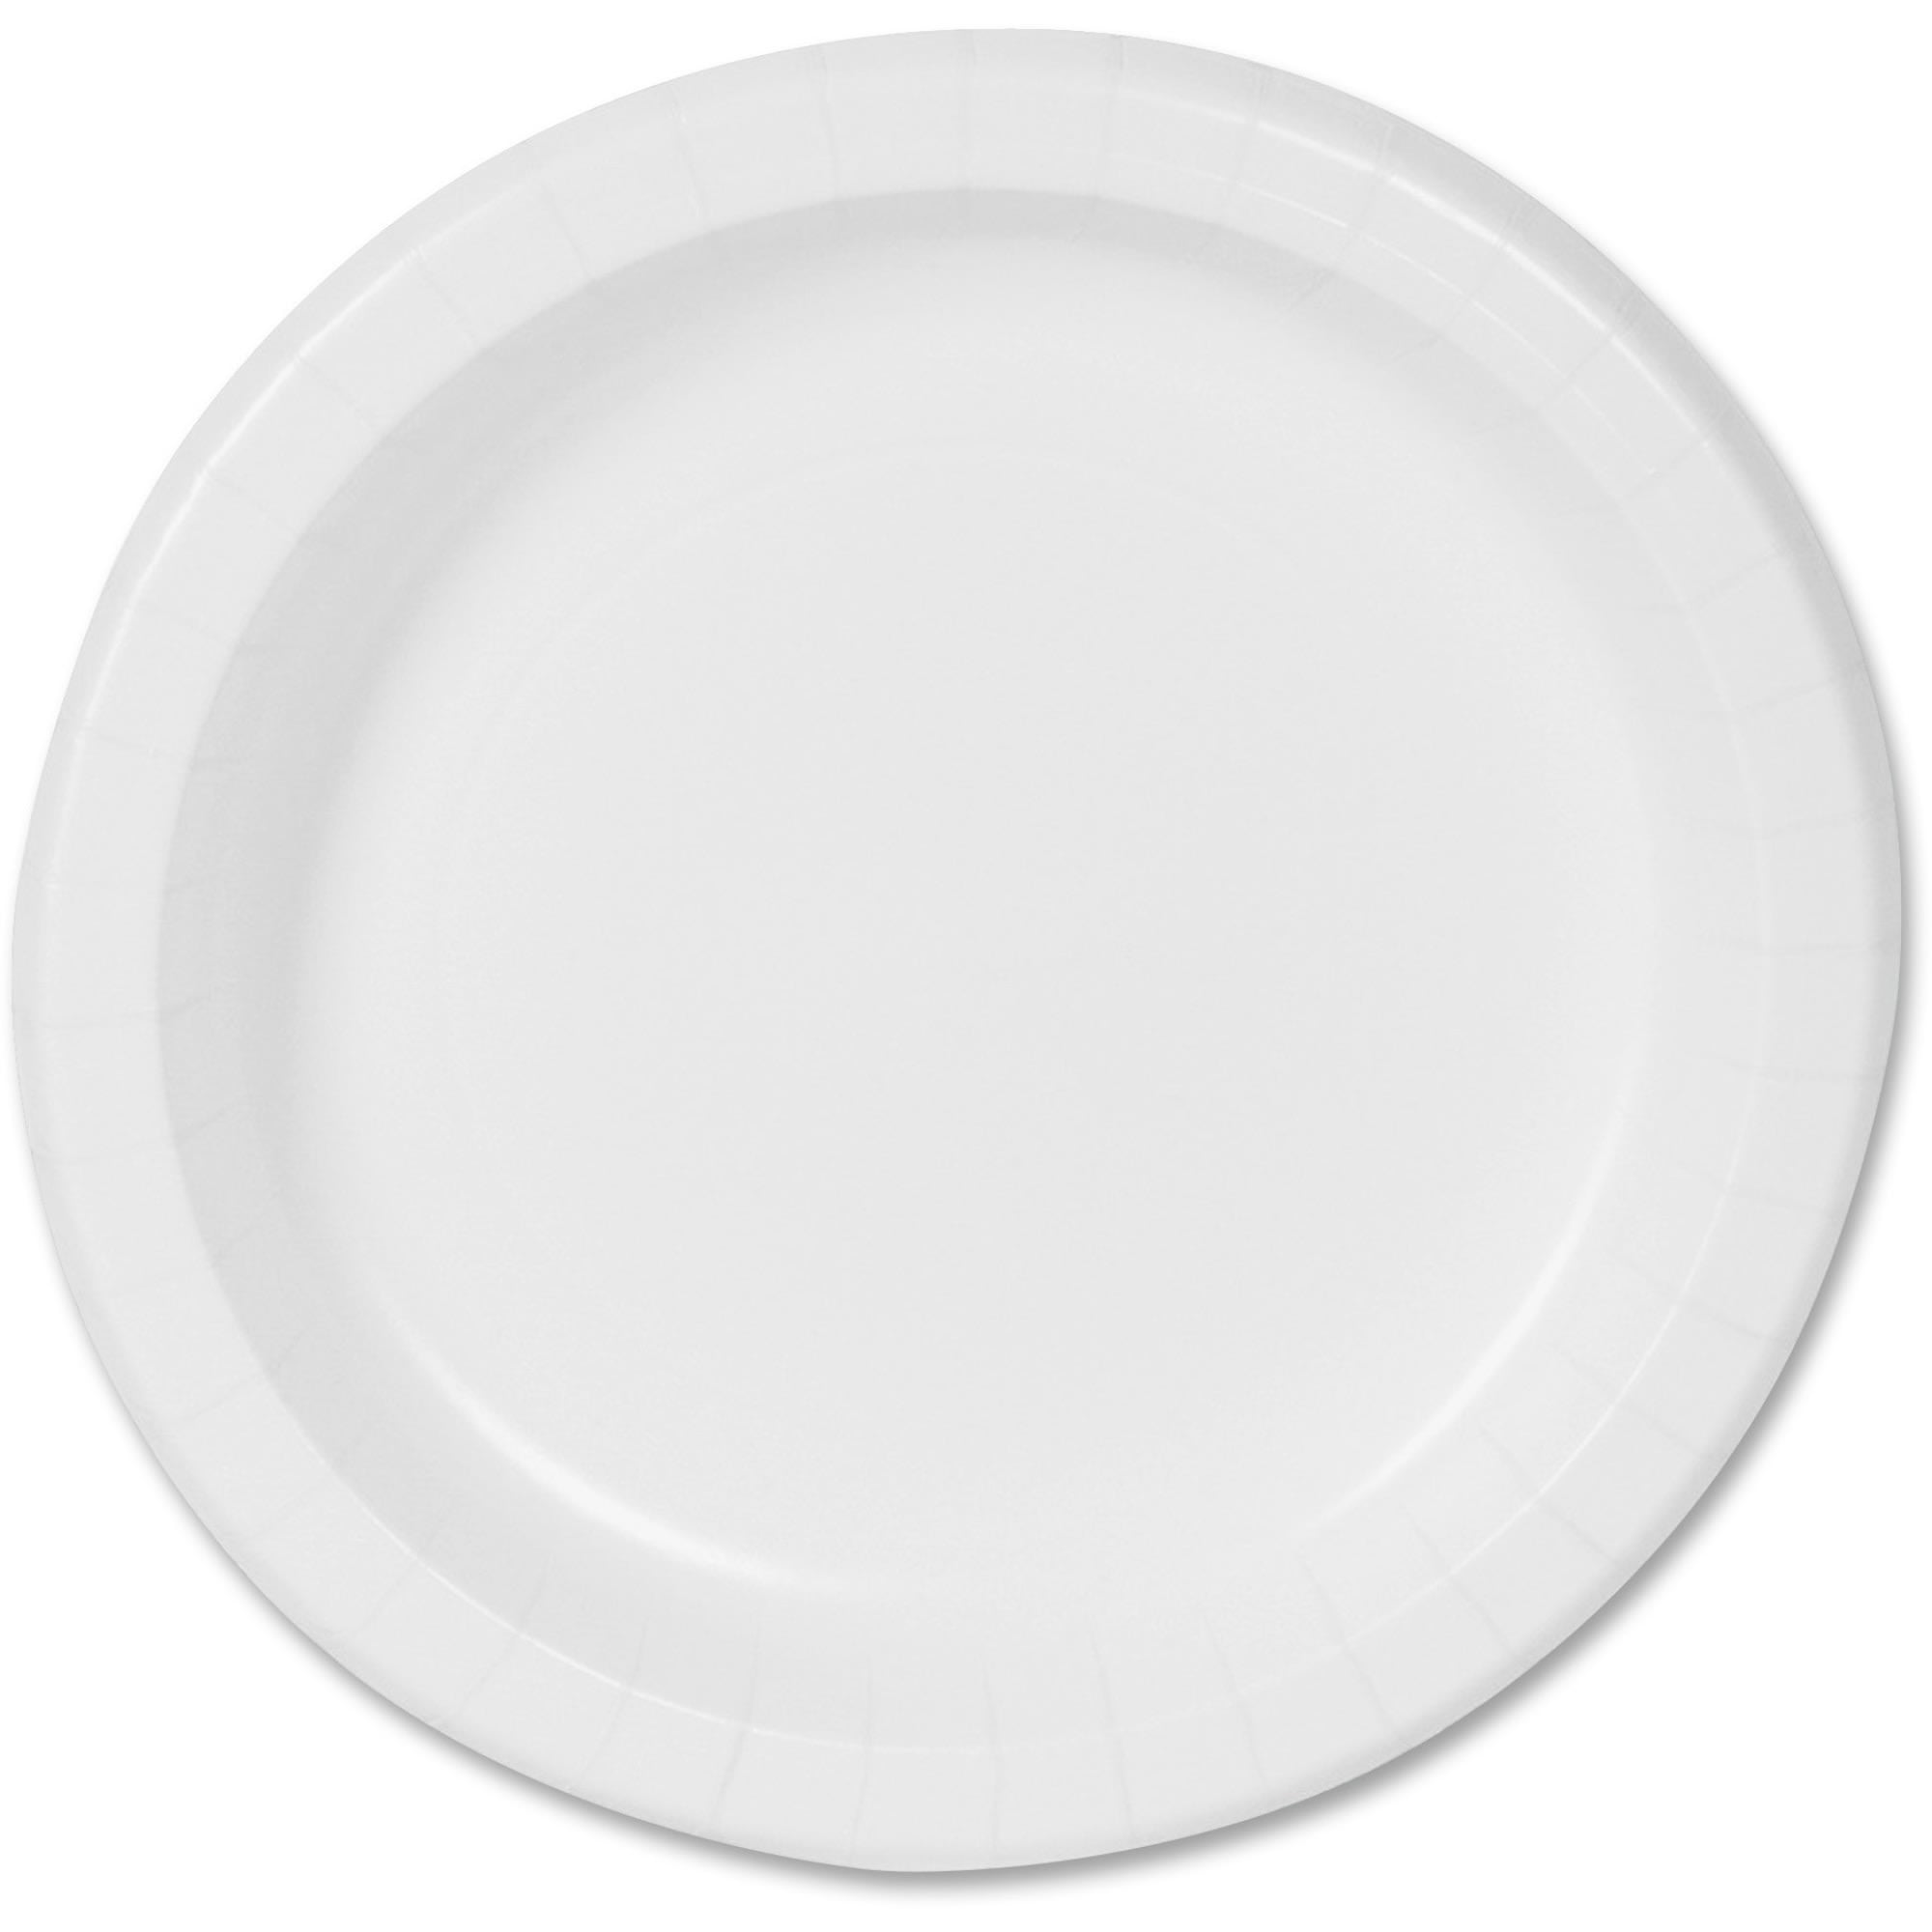 Dixie® (DBP09W) 8.5” Basic Basic Paper Dinnerware Plates by GP PRO  (Georgia-Pacific), White, 500 Count (125 Plates Per Pack, 4 Packs Per Case)  